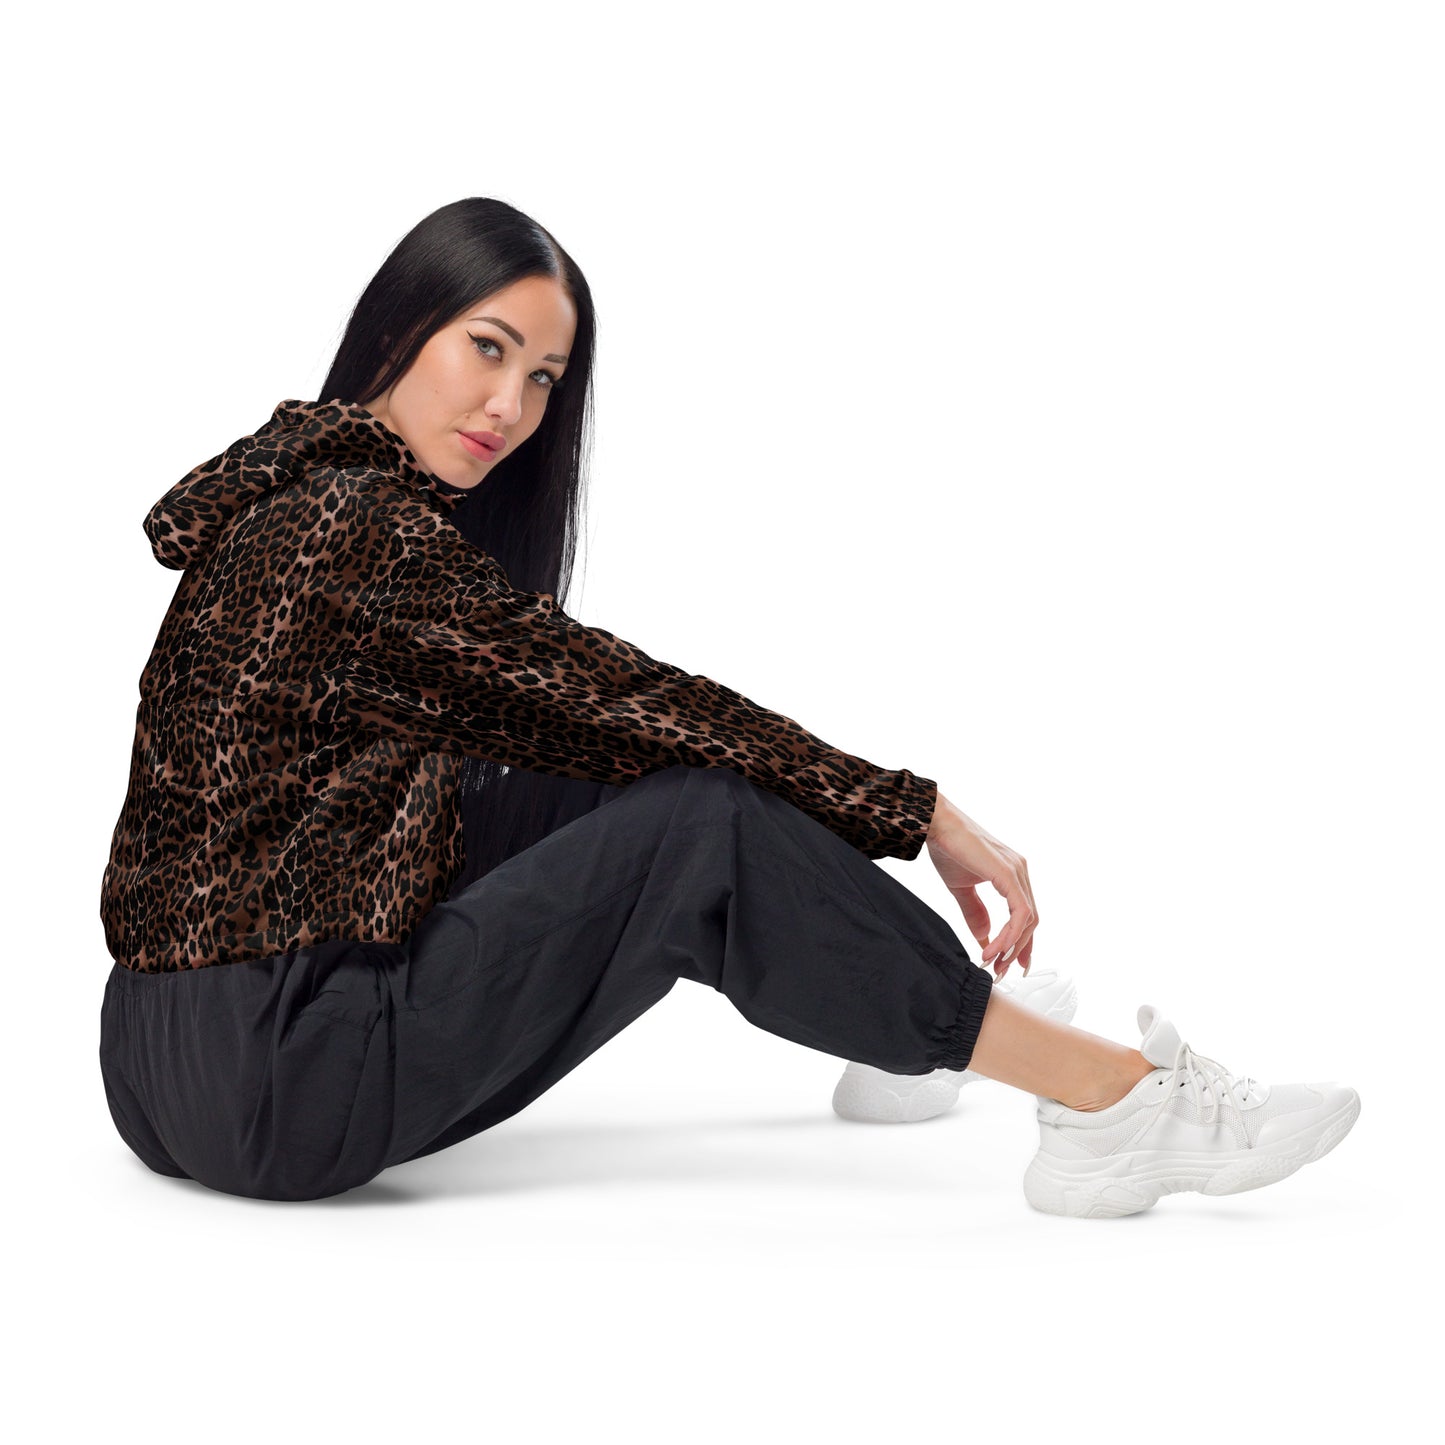 OG Leopard Women’s Cropped Windbreaker Jacket | Pinup Couture Relaxed